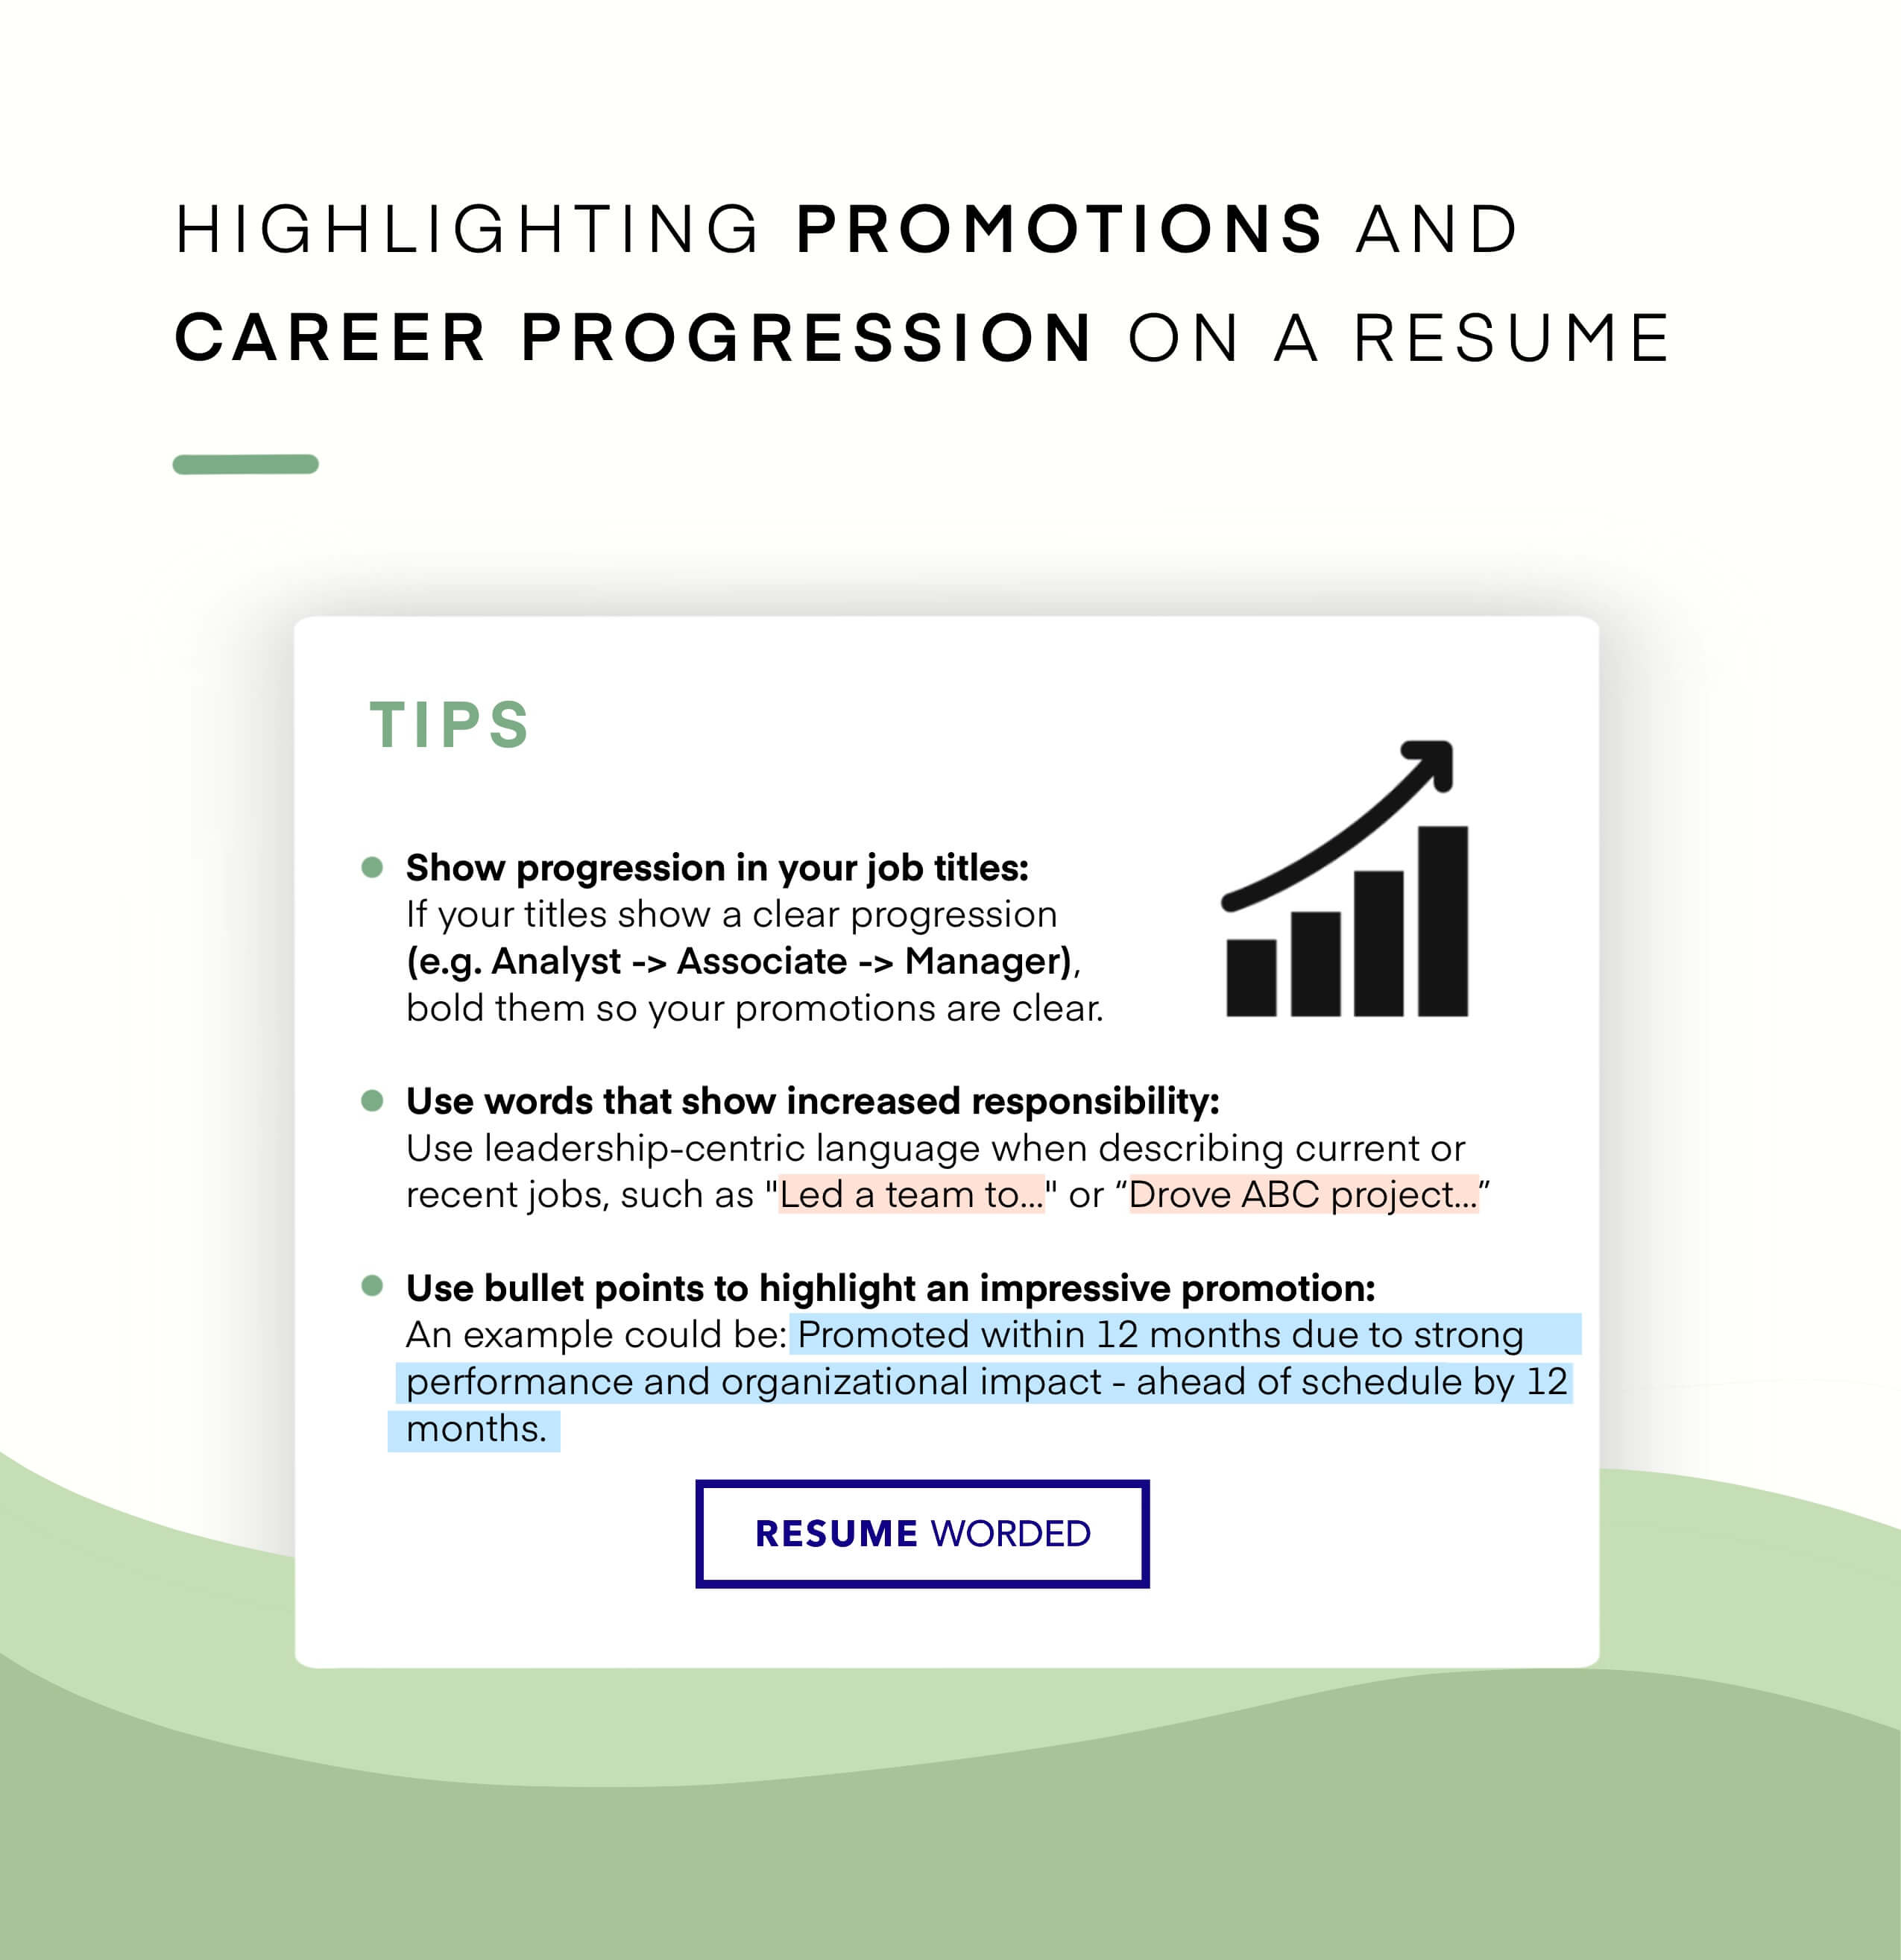 Accomplishments show growth in data entry responsibilities - Data Entry Specialist Resume